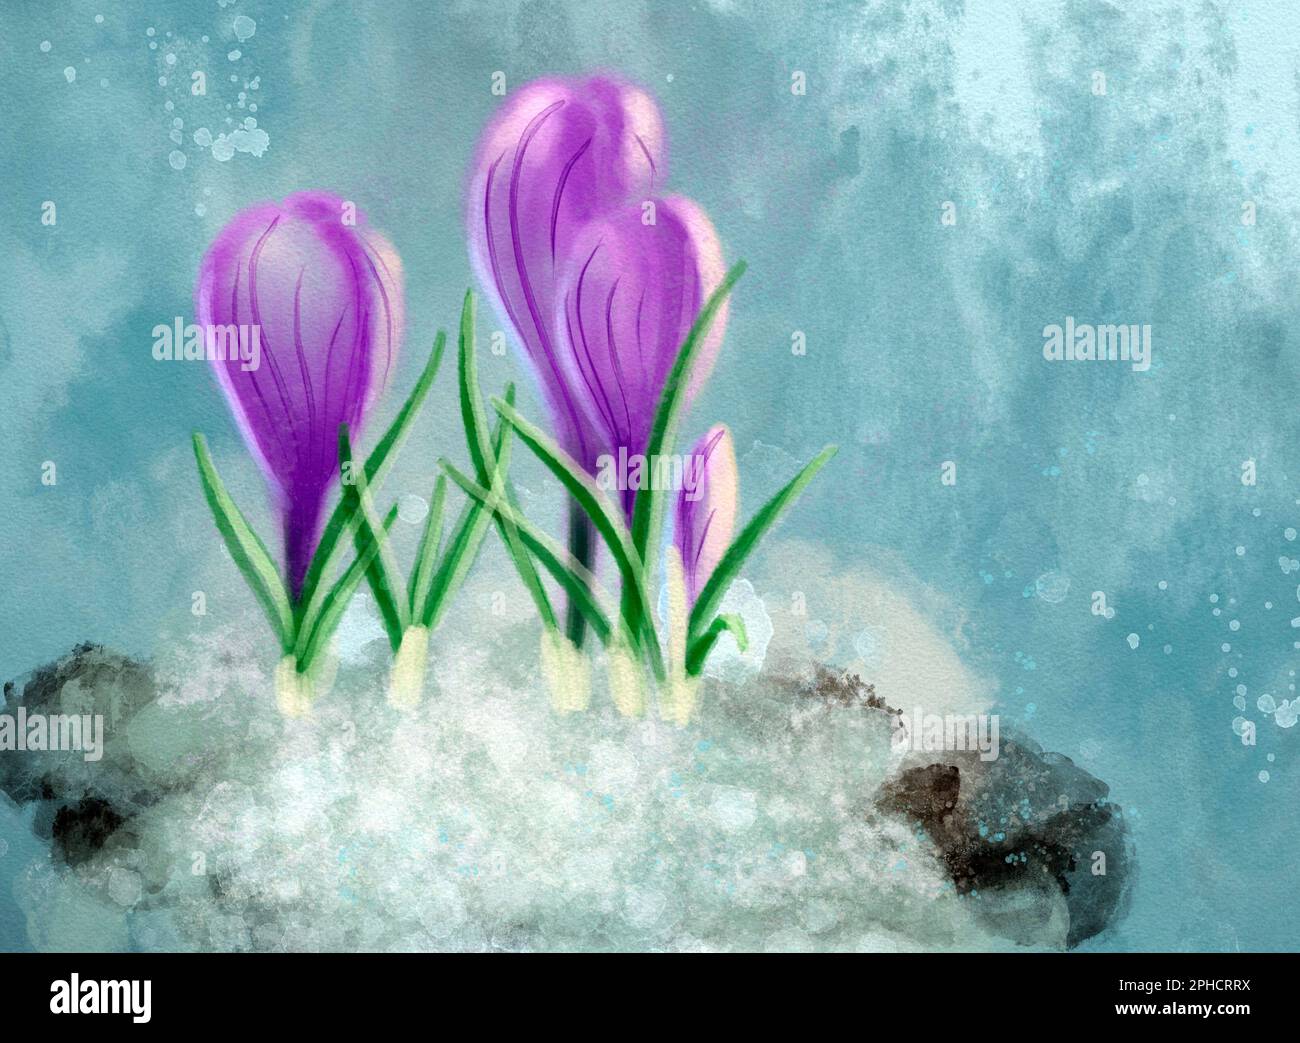 Digital illustration - a group of crocus flowers growing through snow; early spring cheerful and bright flowers Stock Photo